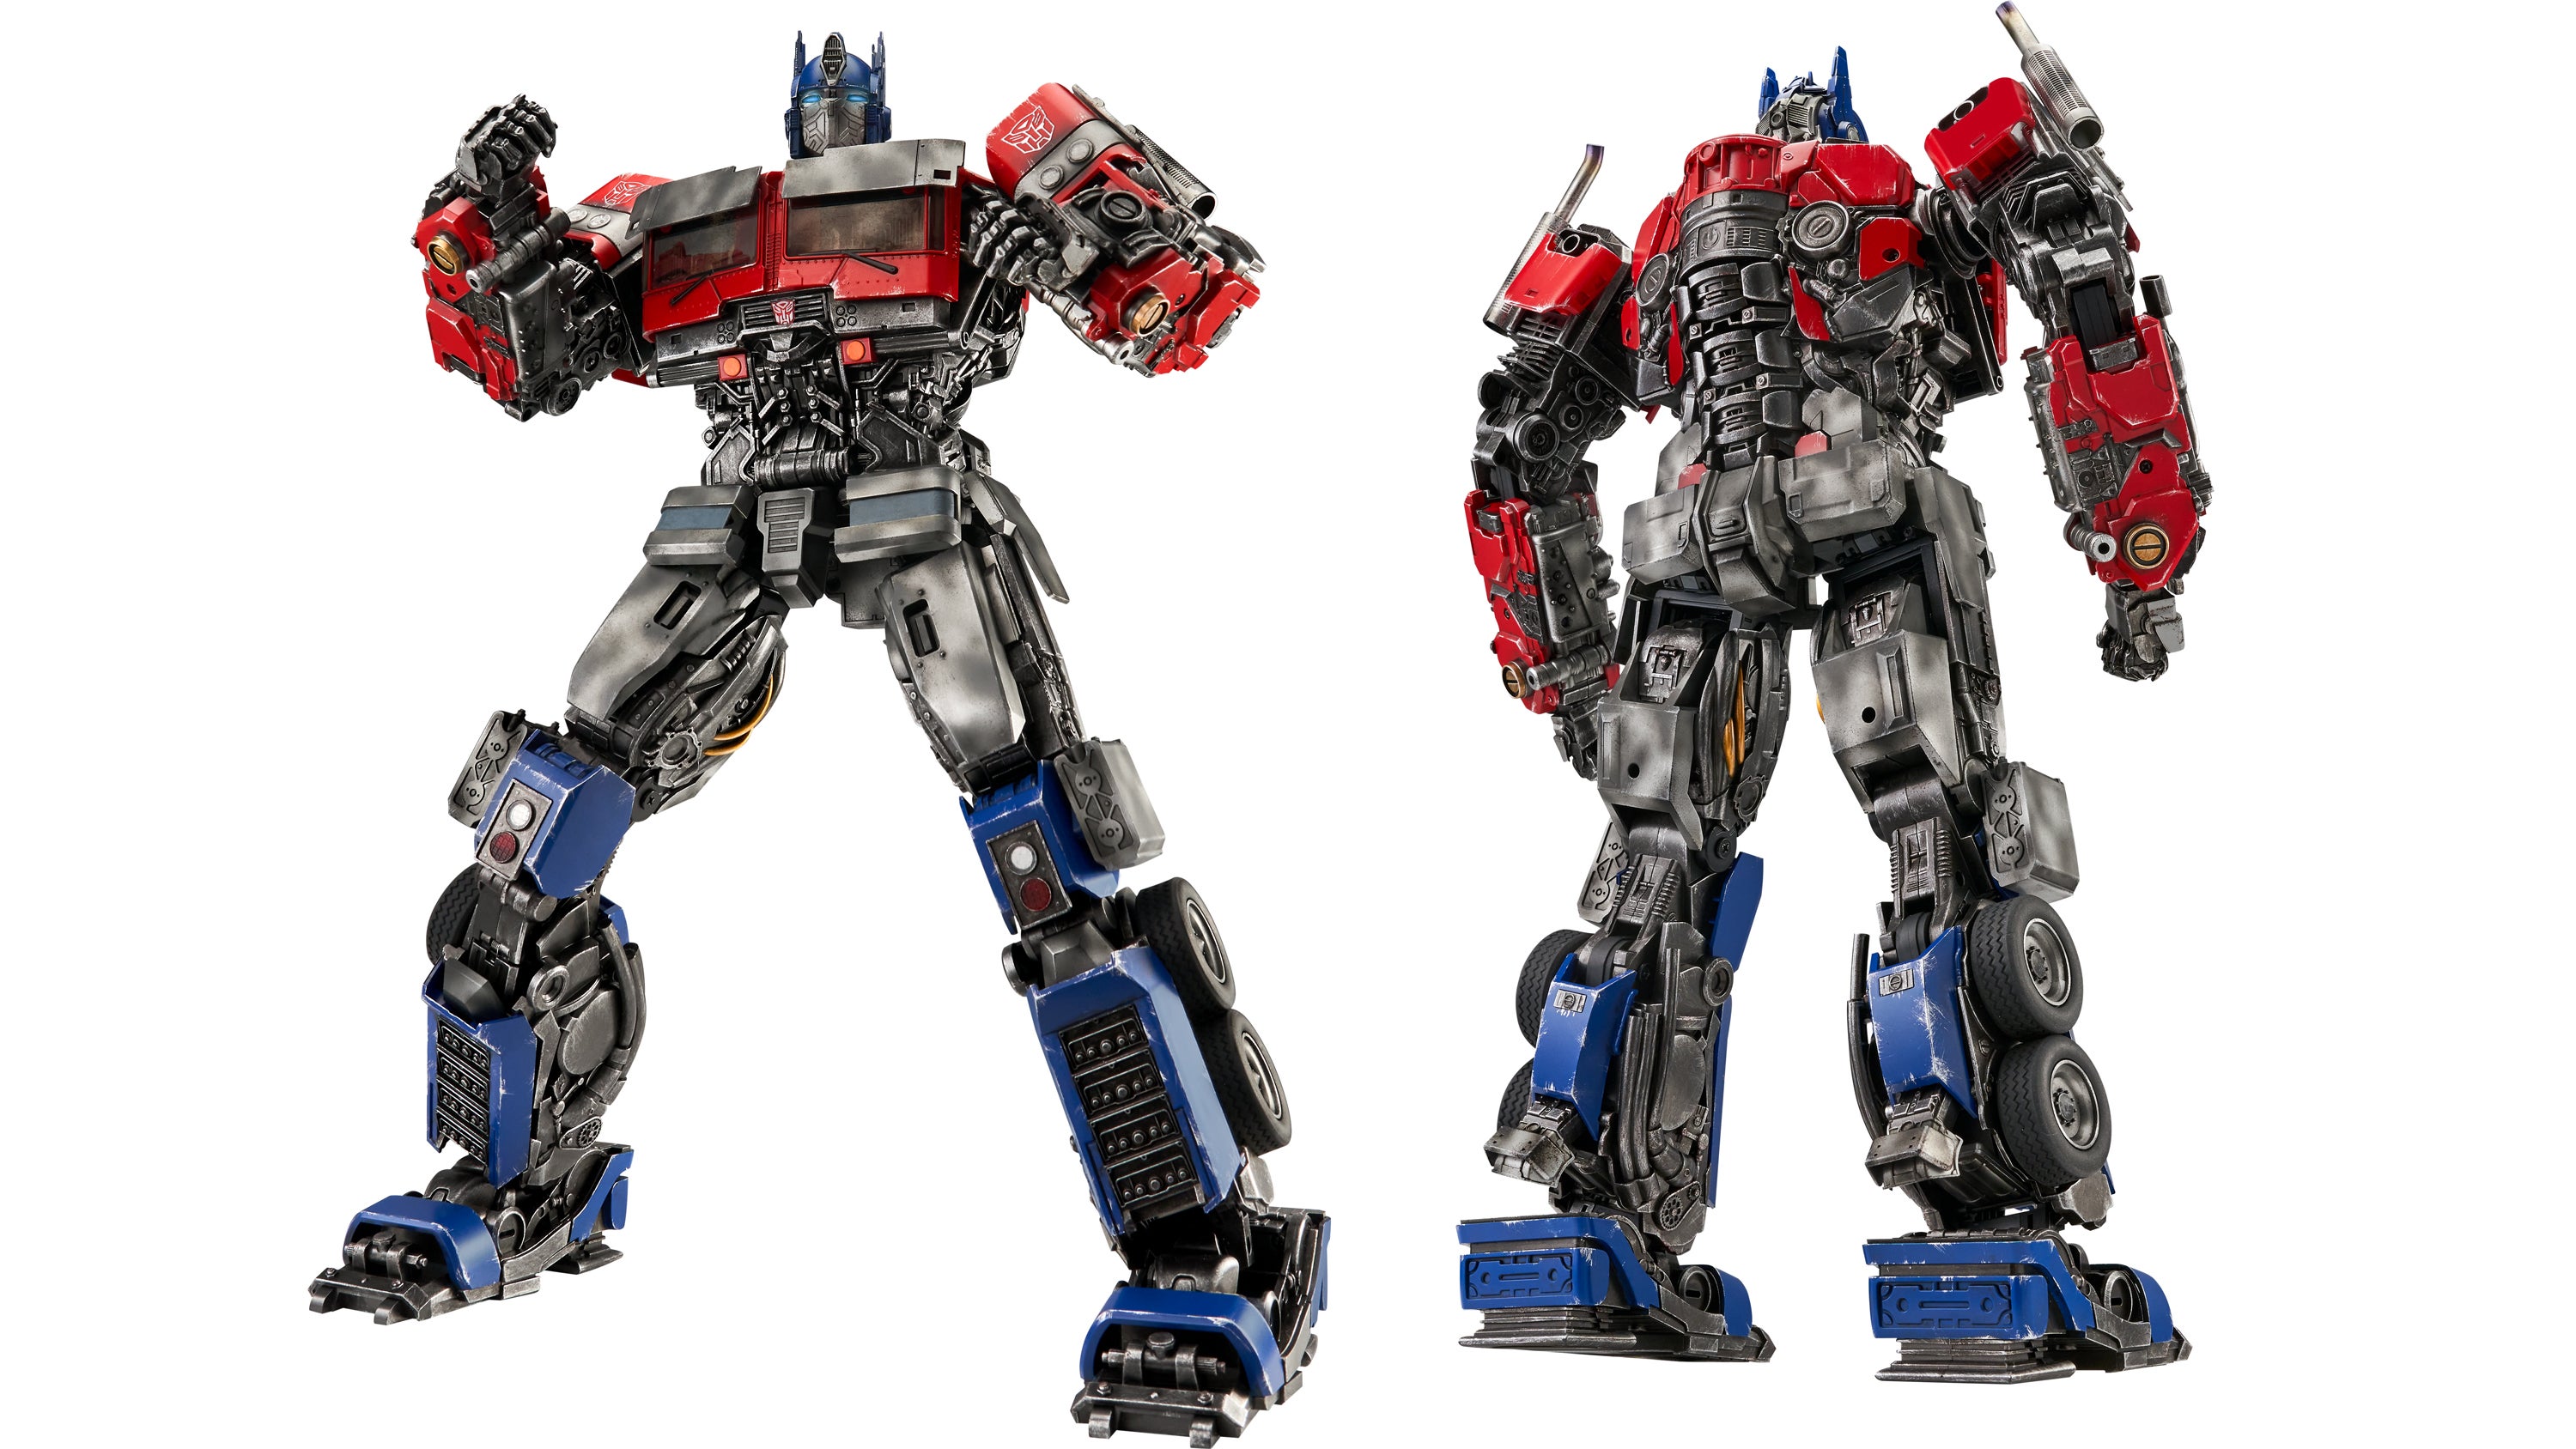 The Movie Version of Optimus Prime From Transformers: Rise of the Beasts Is Now a Walking, Talking Robot Toy